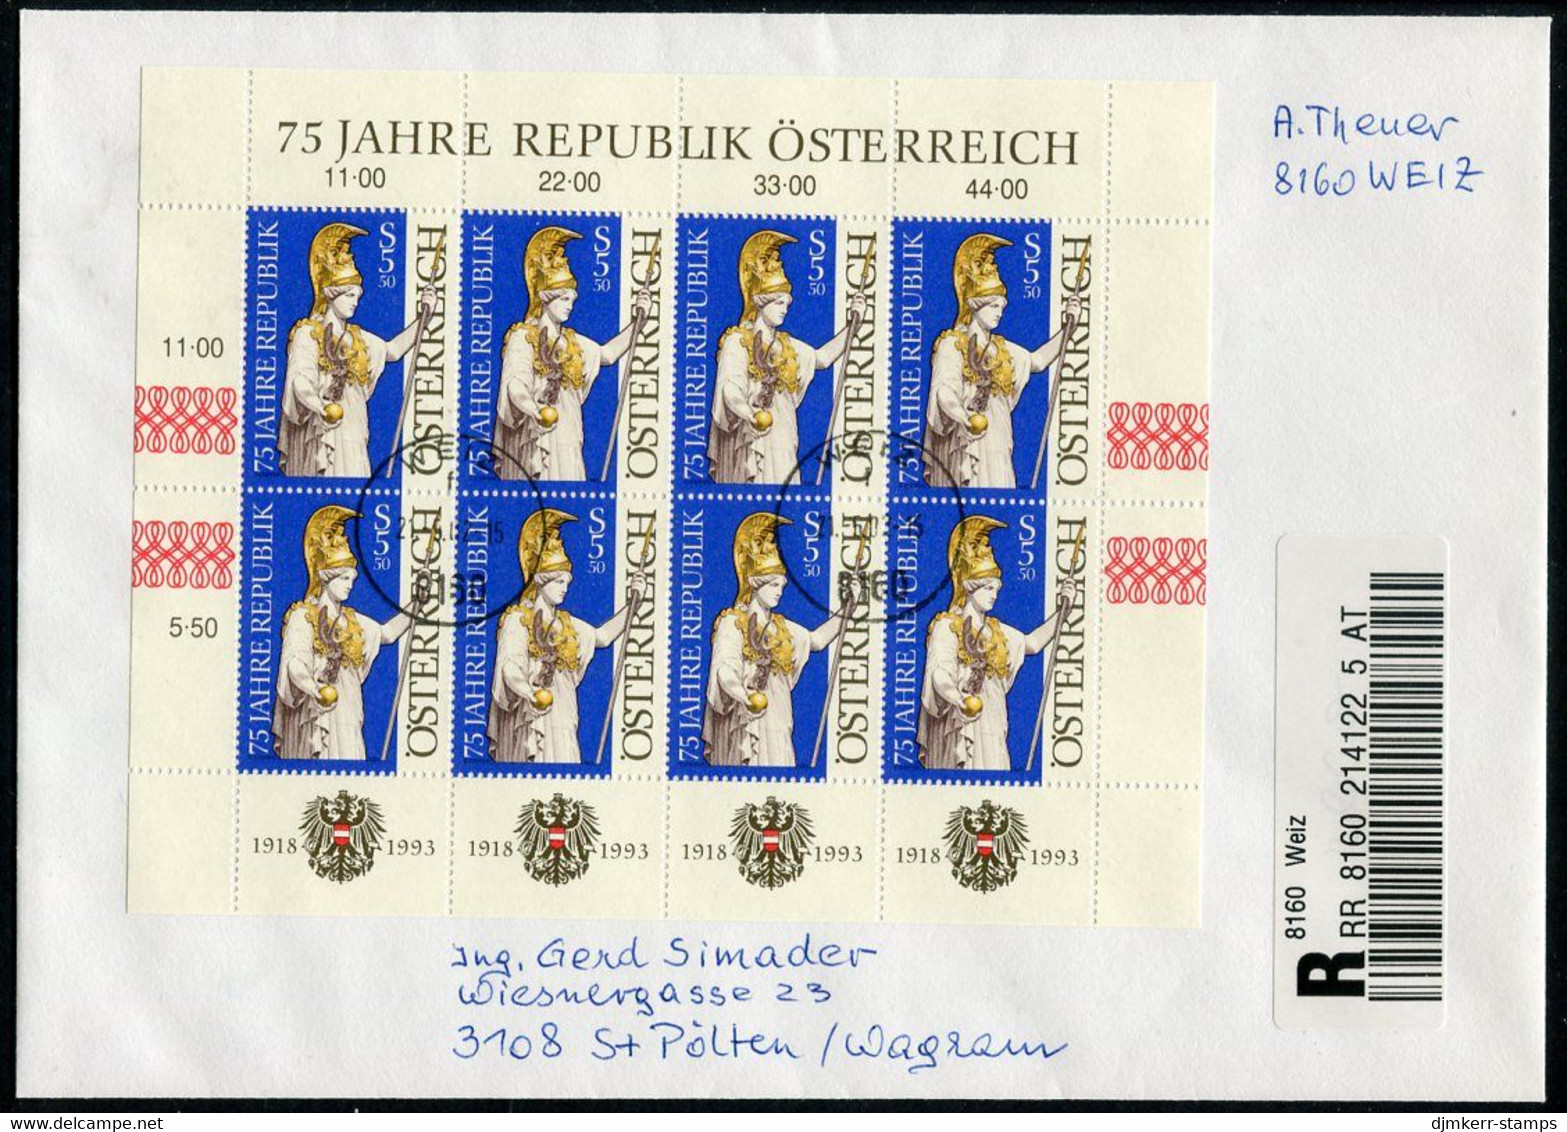 AUSTRIA 1993 Anniversary Of Republic Sheetlet, Postally Used On Registered Cover.  Michel 2113 Kb - Blocs & Hojas